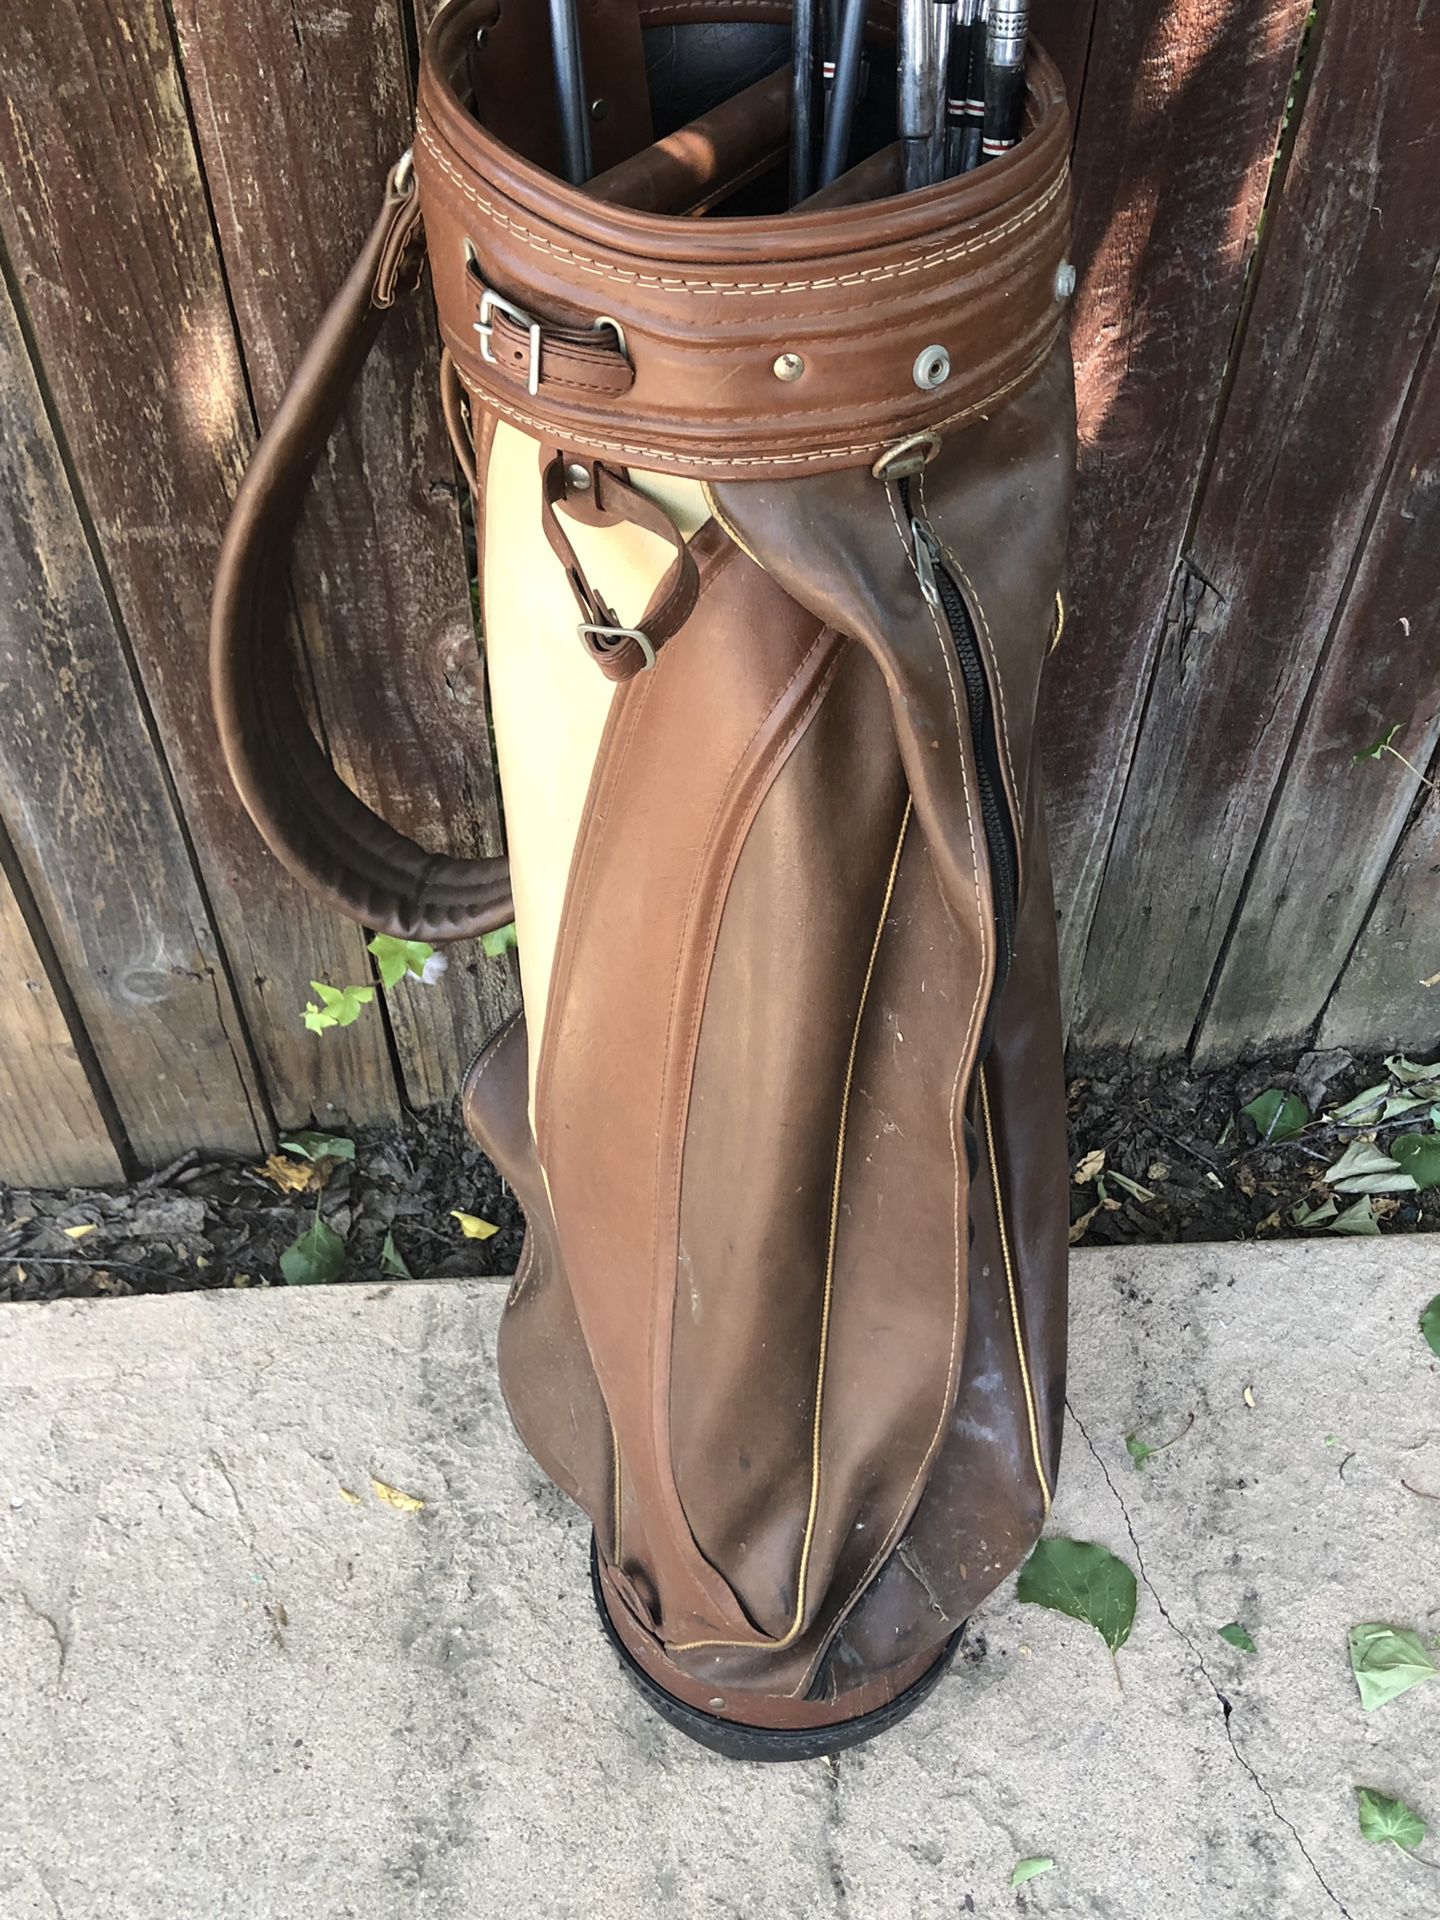 Best Vintage Leather Golf Bag And Clubs for sale in Huntersville, North  Carolina for 2023